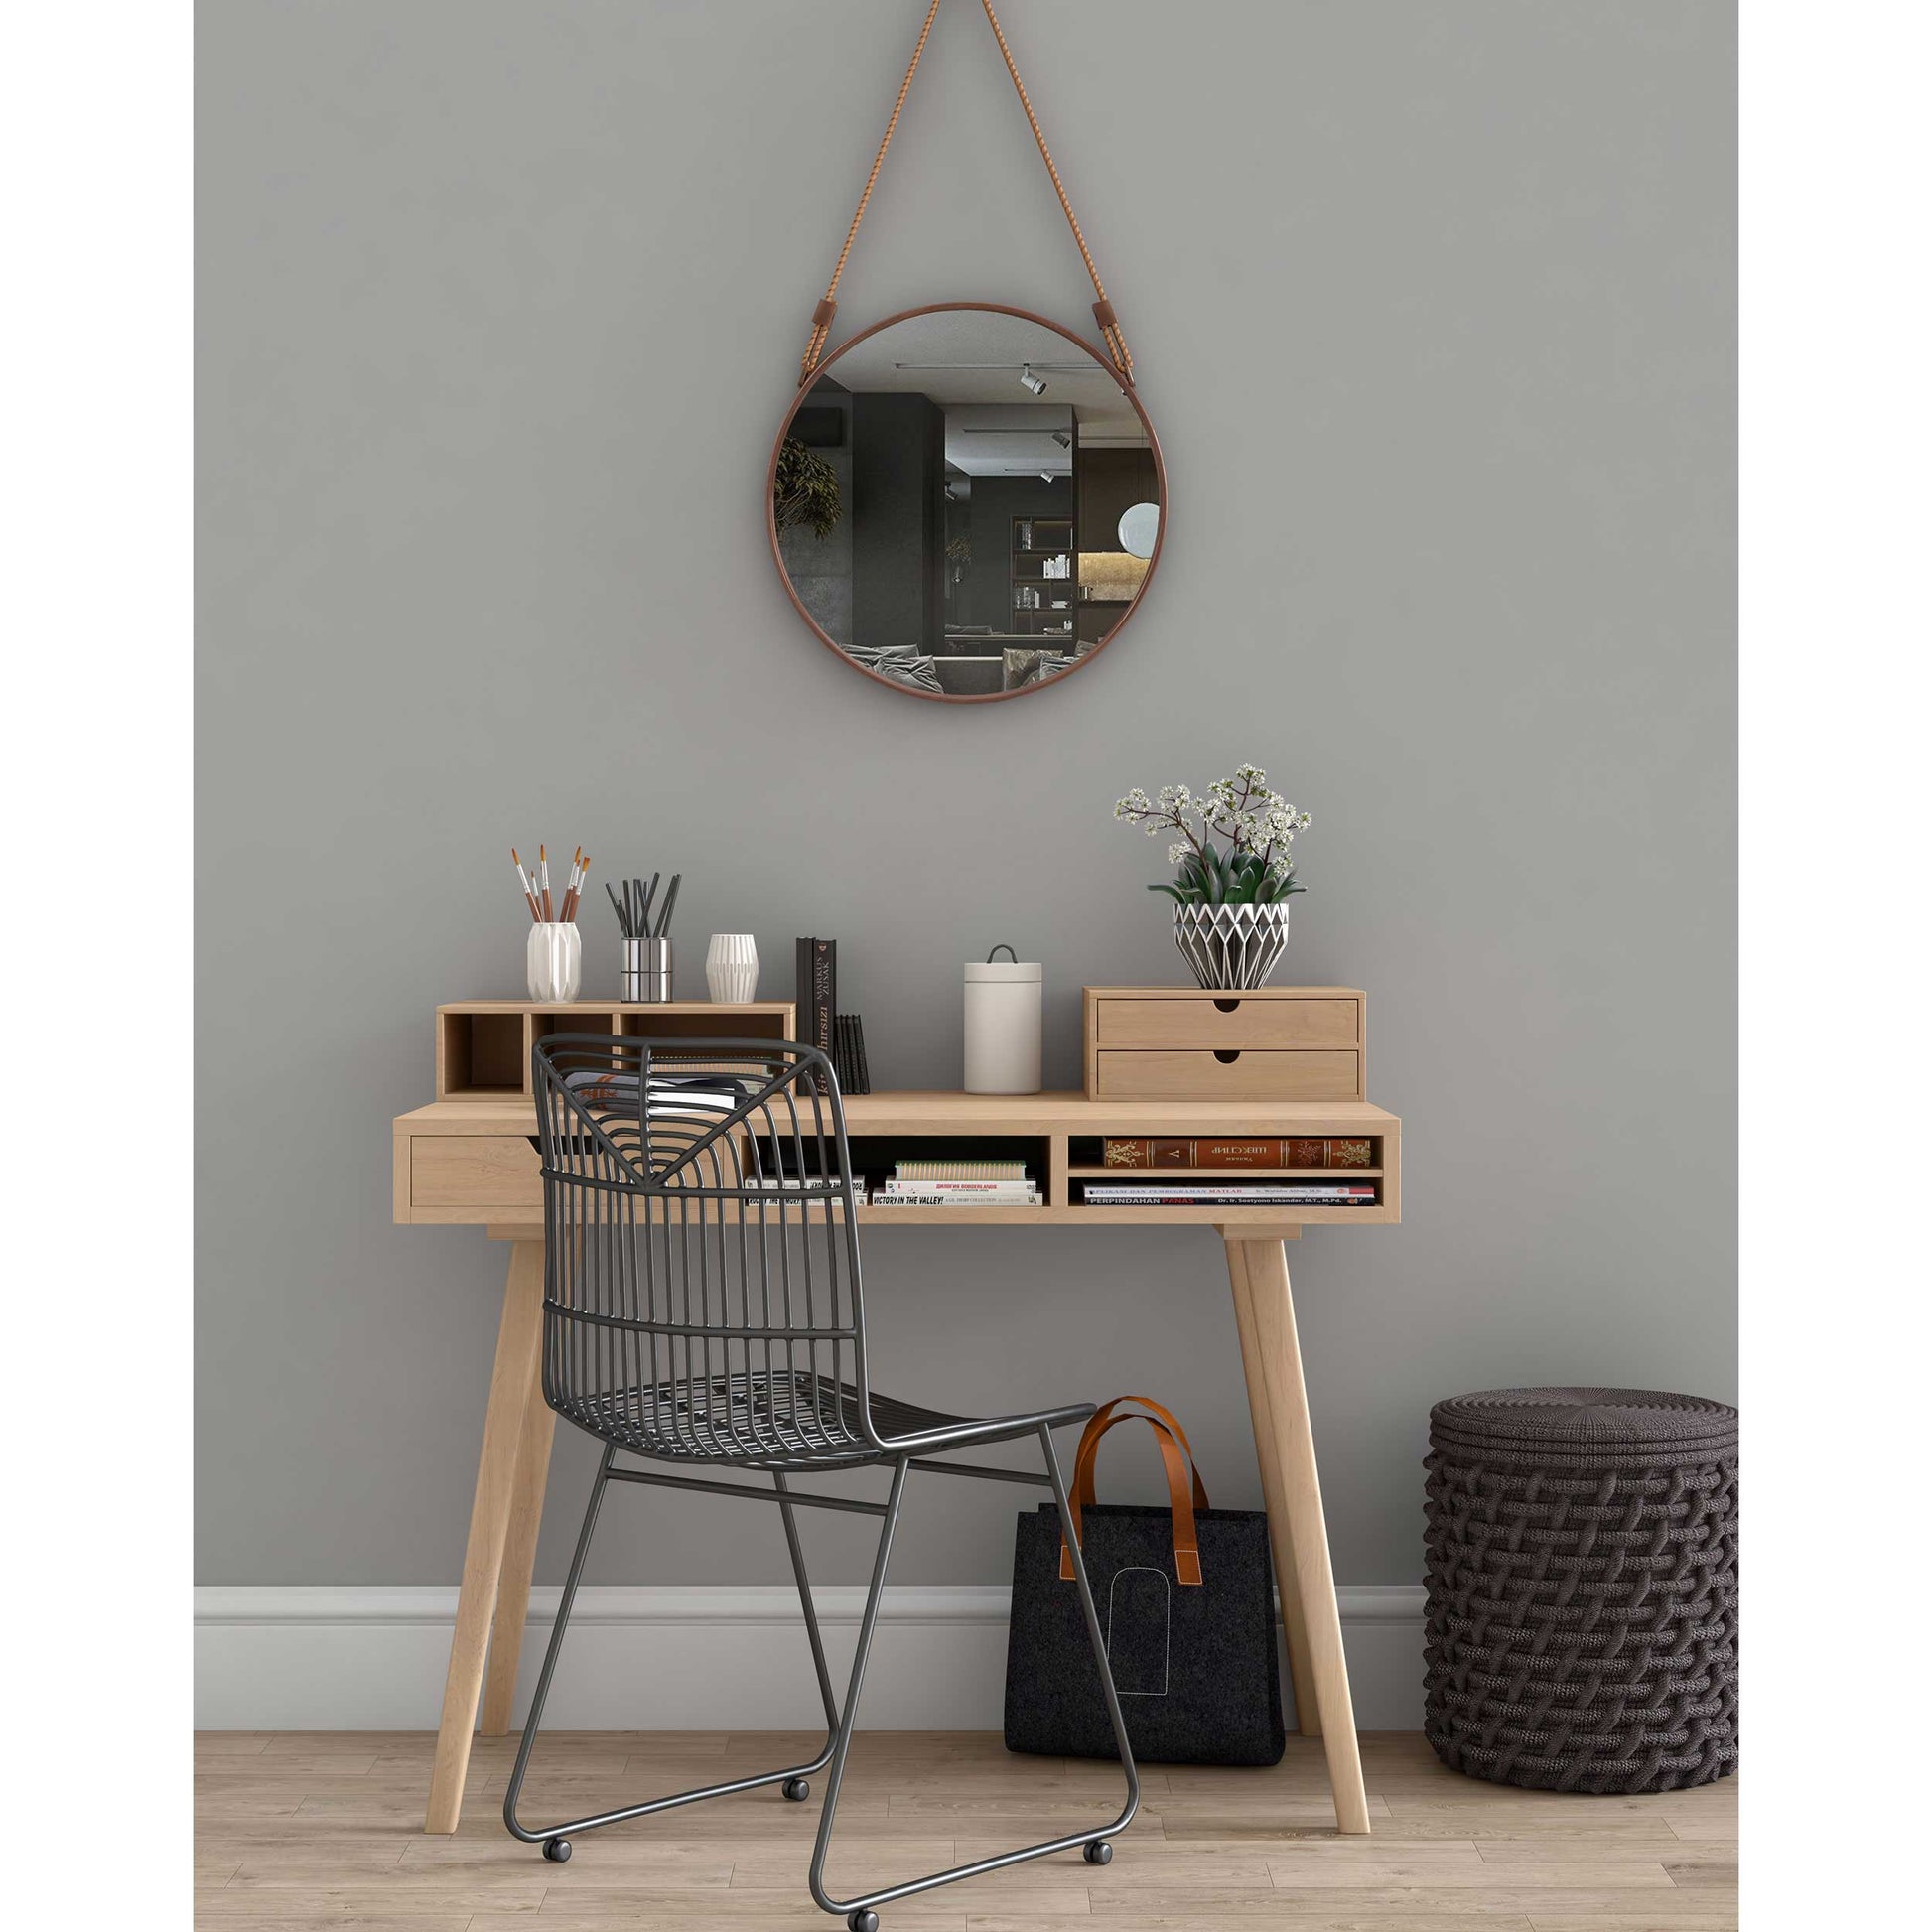 Stylish workspace with a coastal-style round rope mirror on the wall